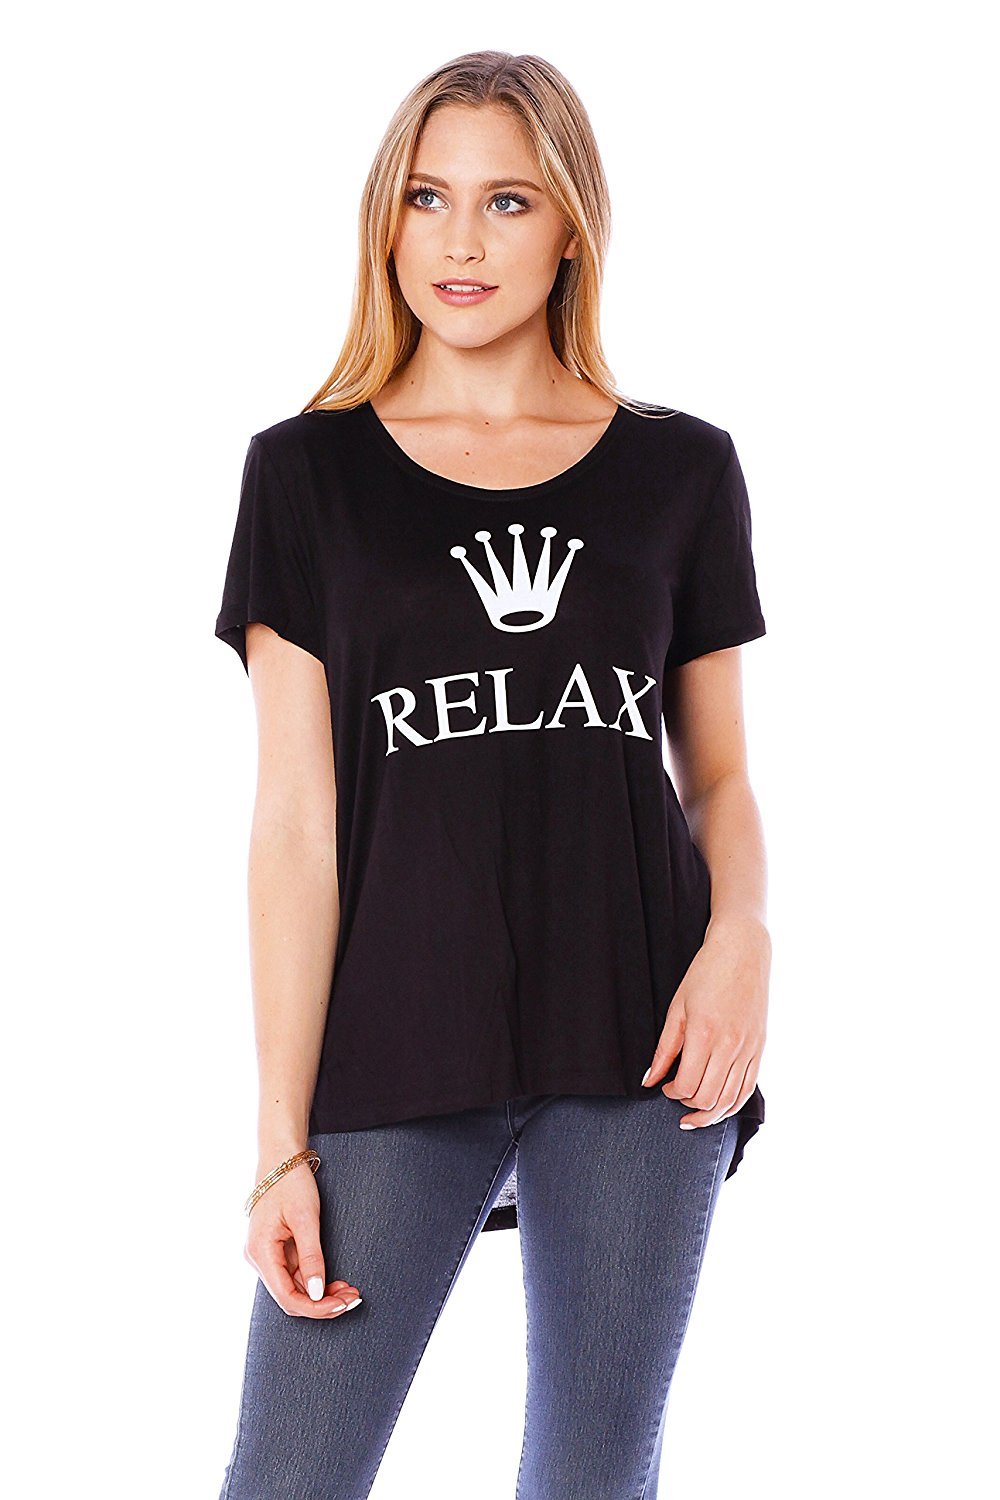 Sleeveless Tank Top Graphic Tees Relax